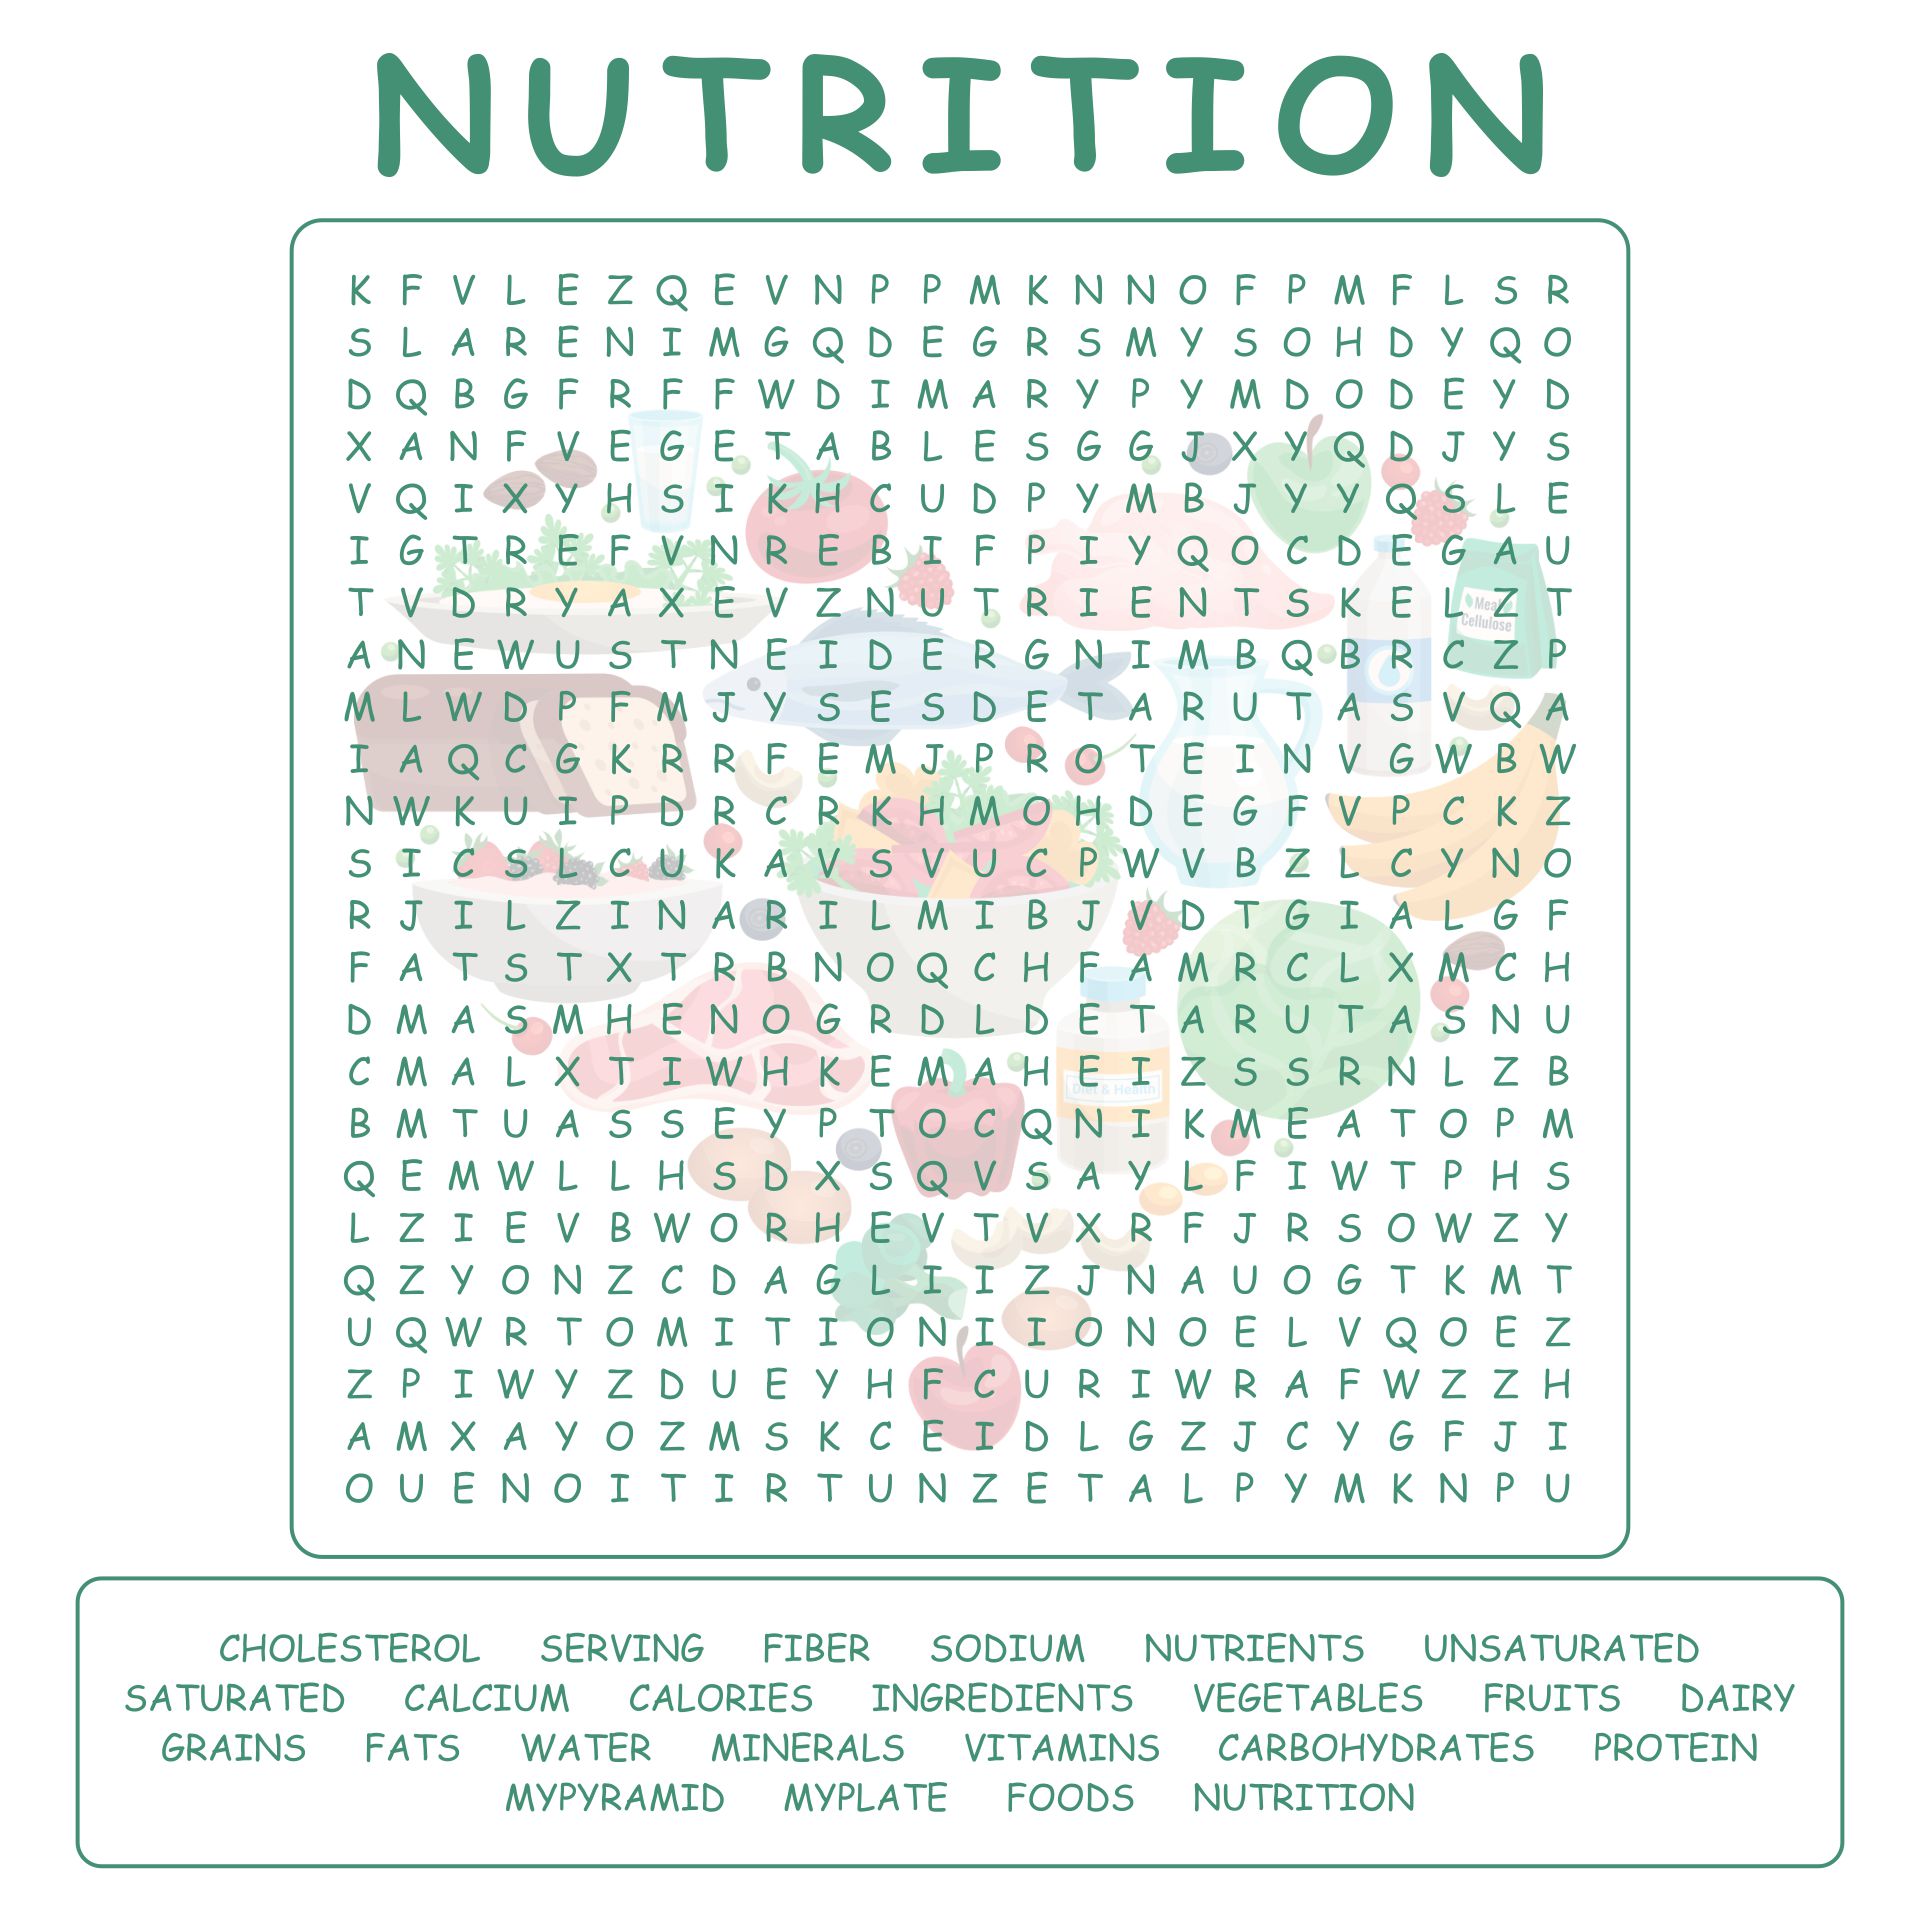 9 Best Images of Wellness Word Search Puzzle Printable - Healthy Eating